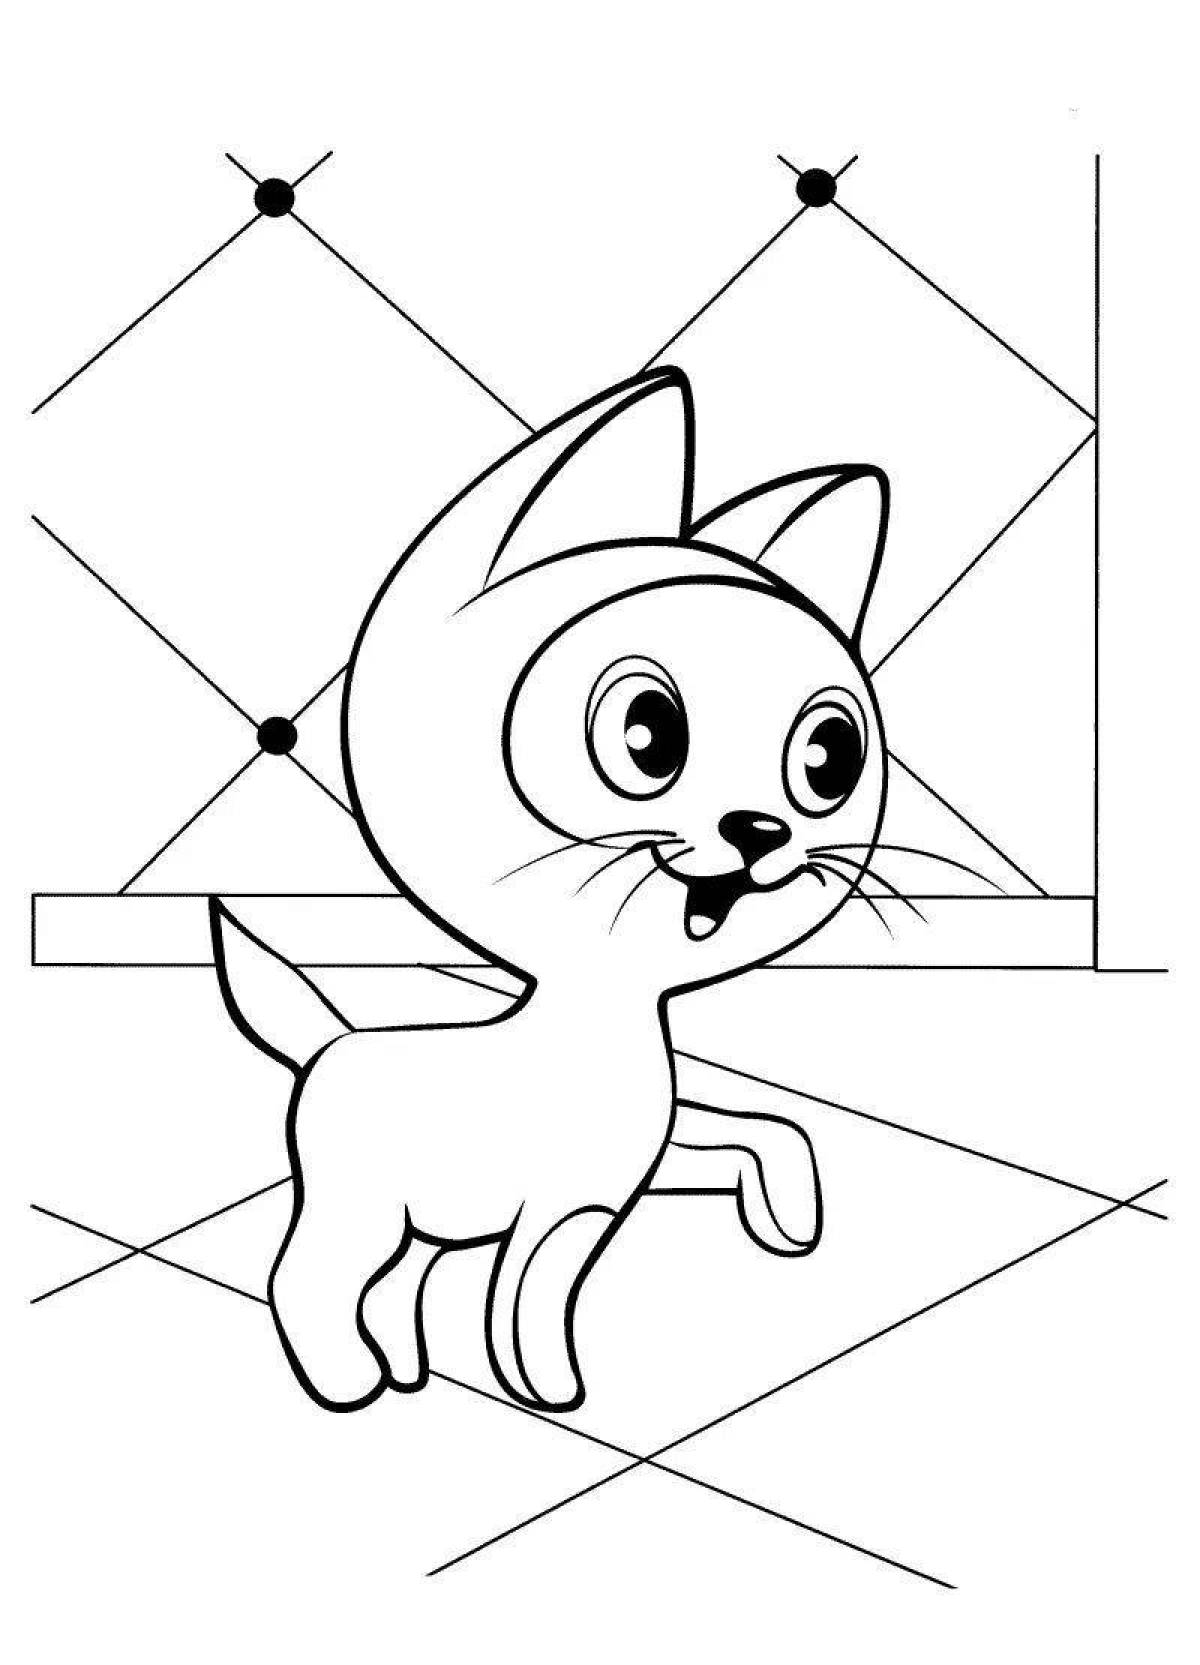 Colorful woof coloring page